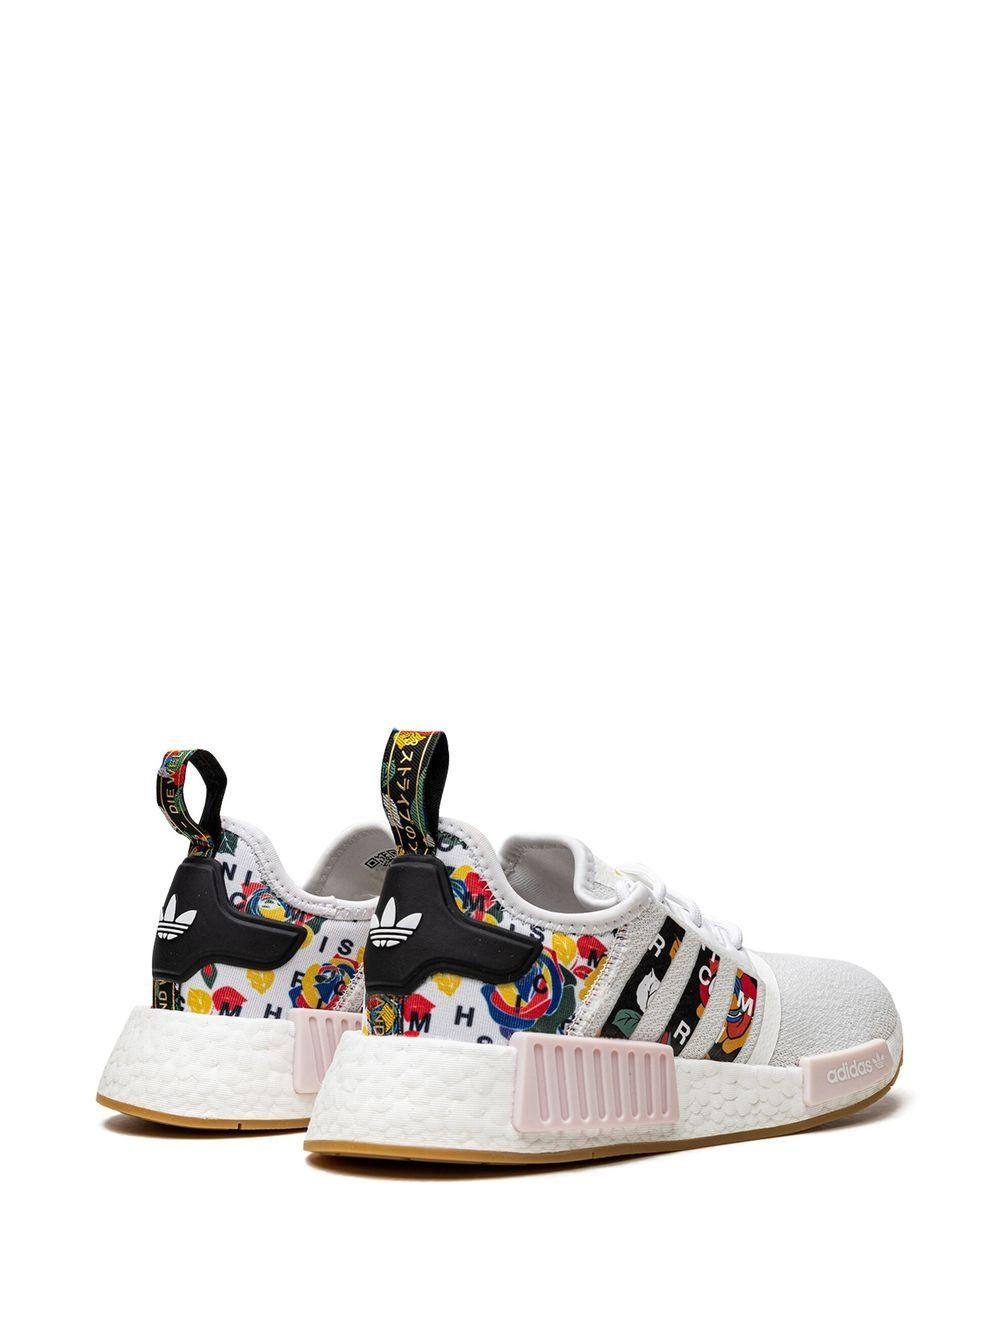 adidas X Rich Mnisi Nmd R1 Low-top Sneakers in White